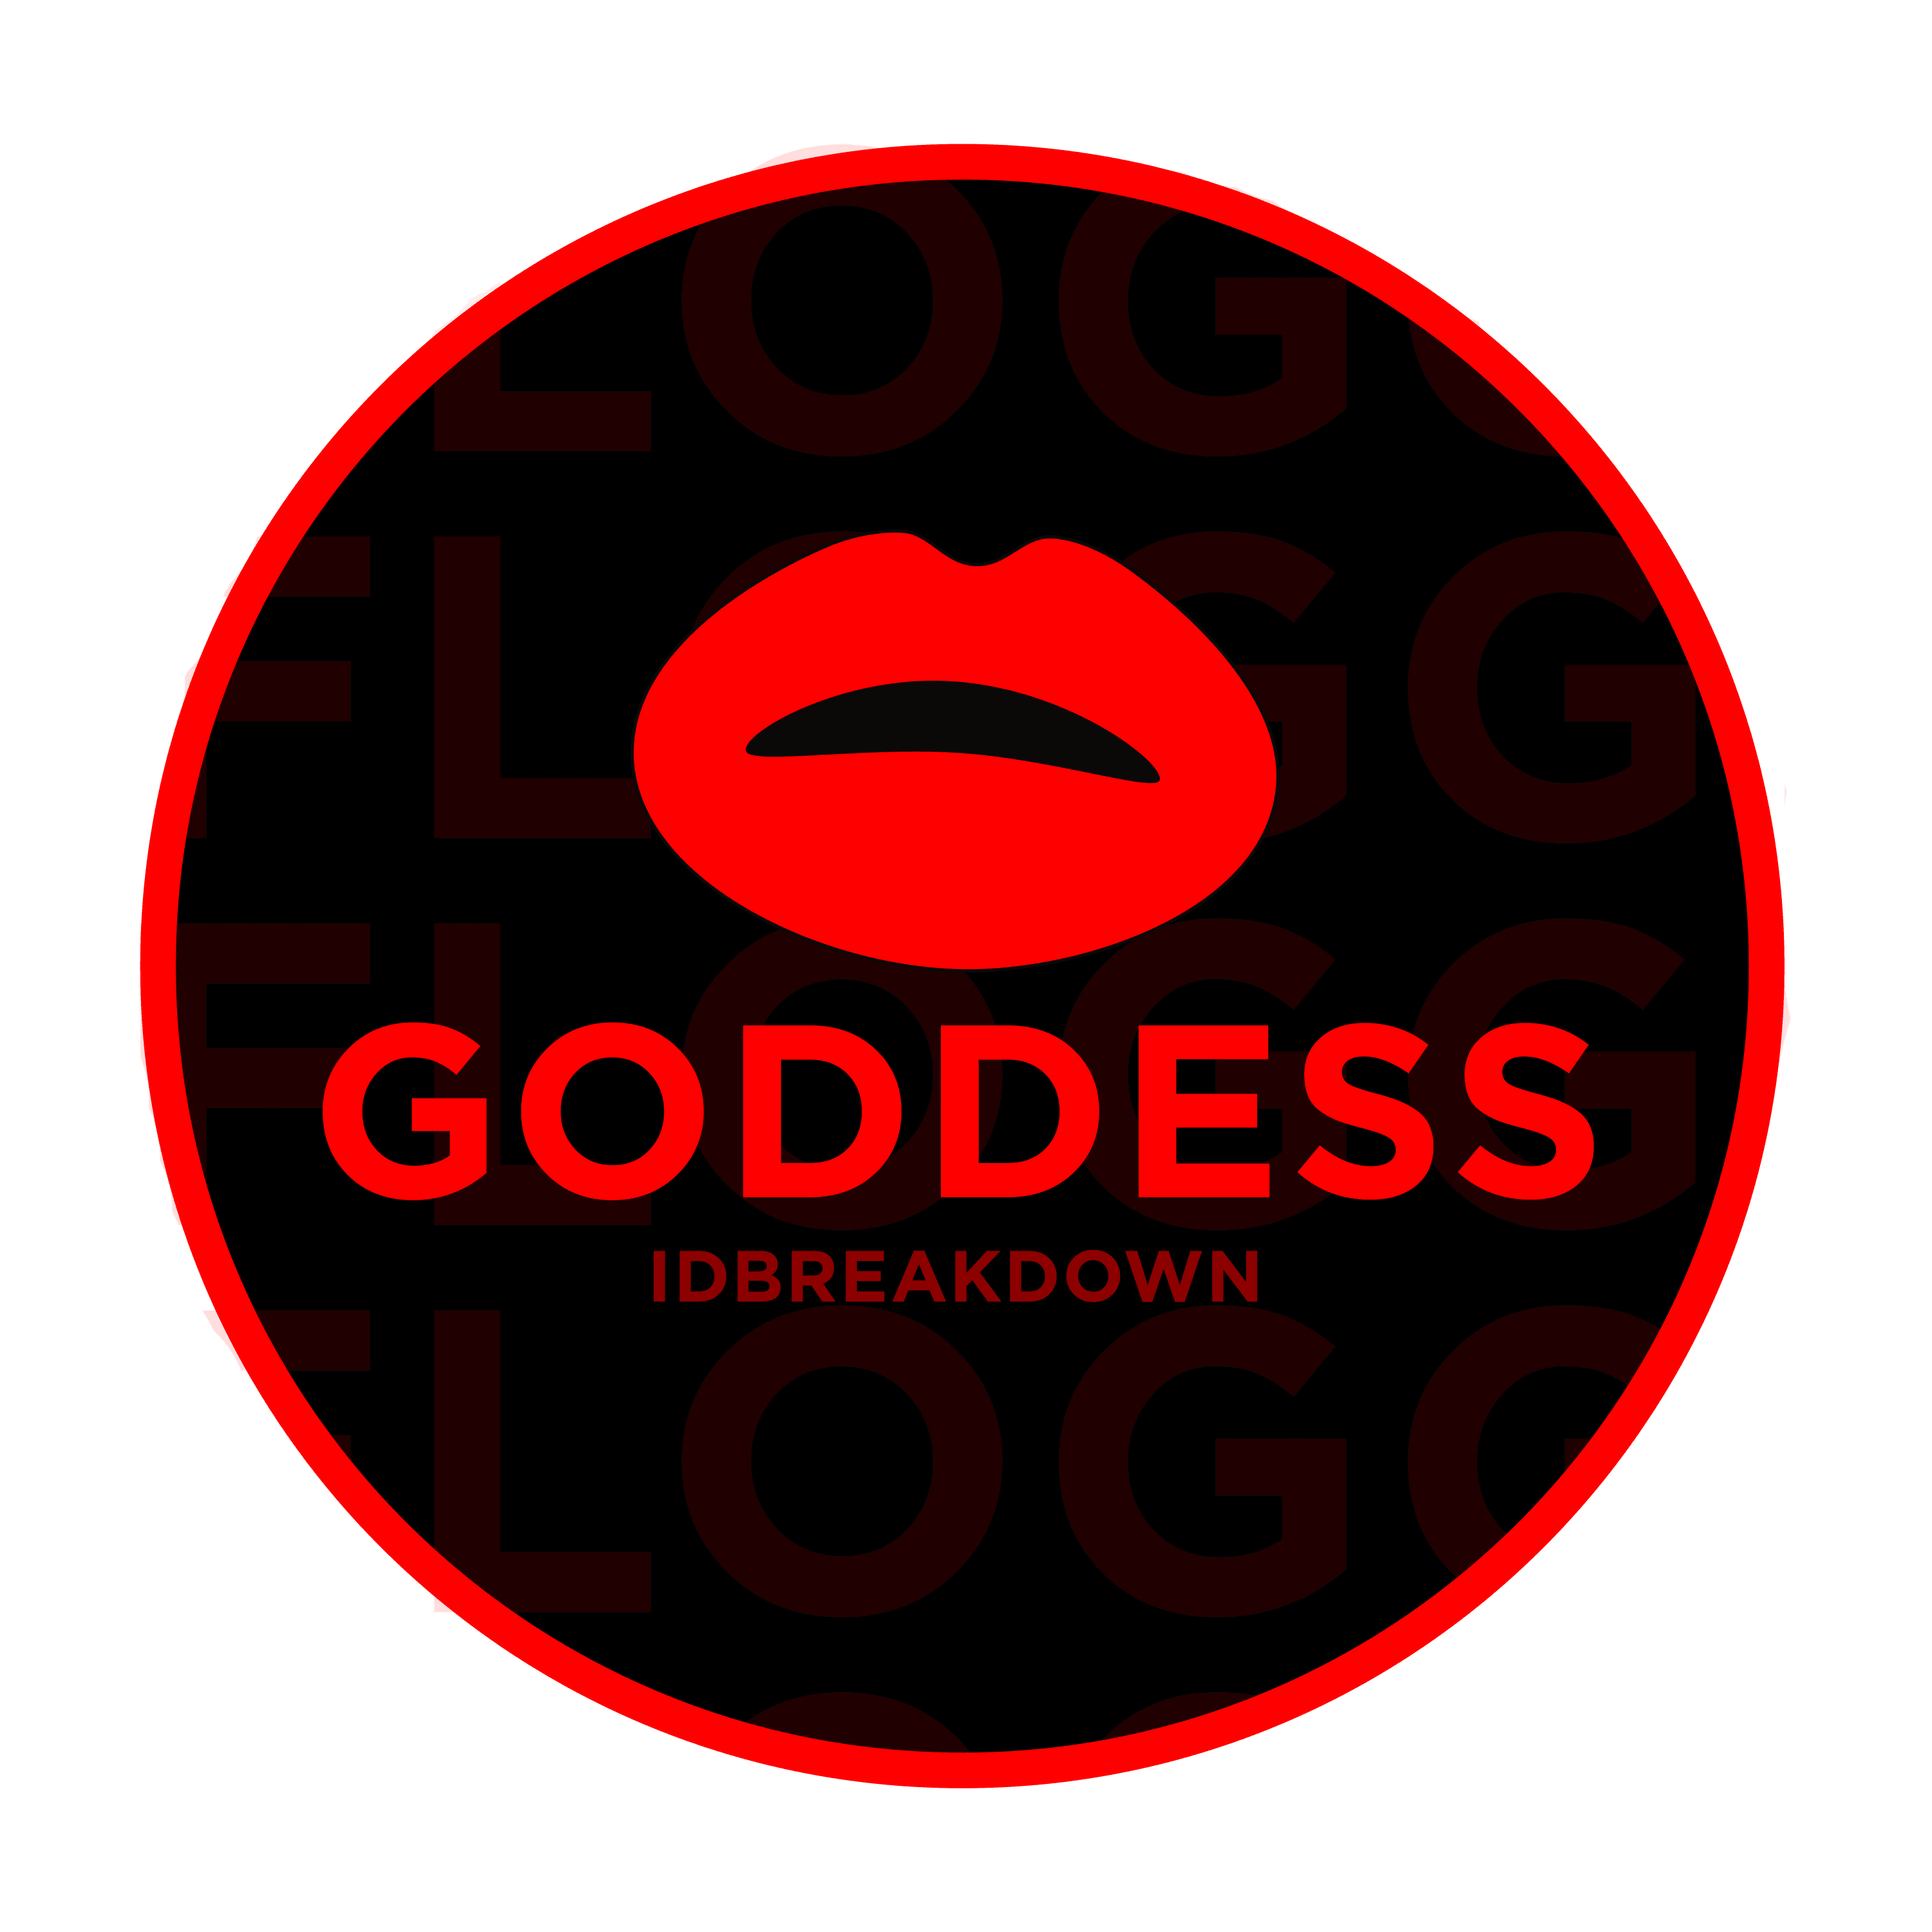 Obey Your Goddess